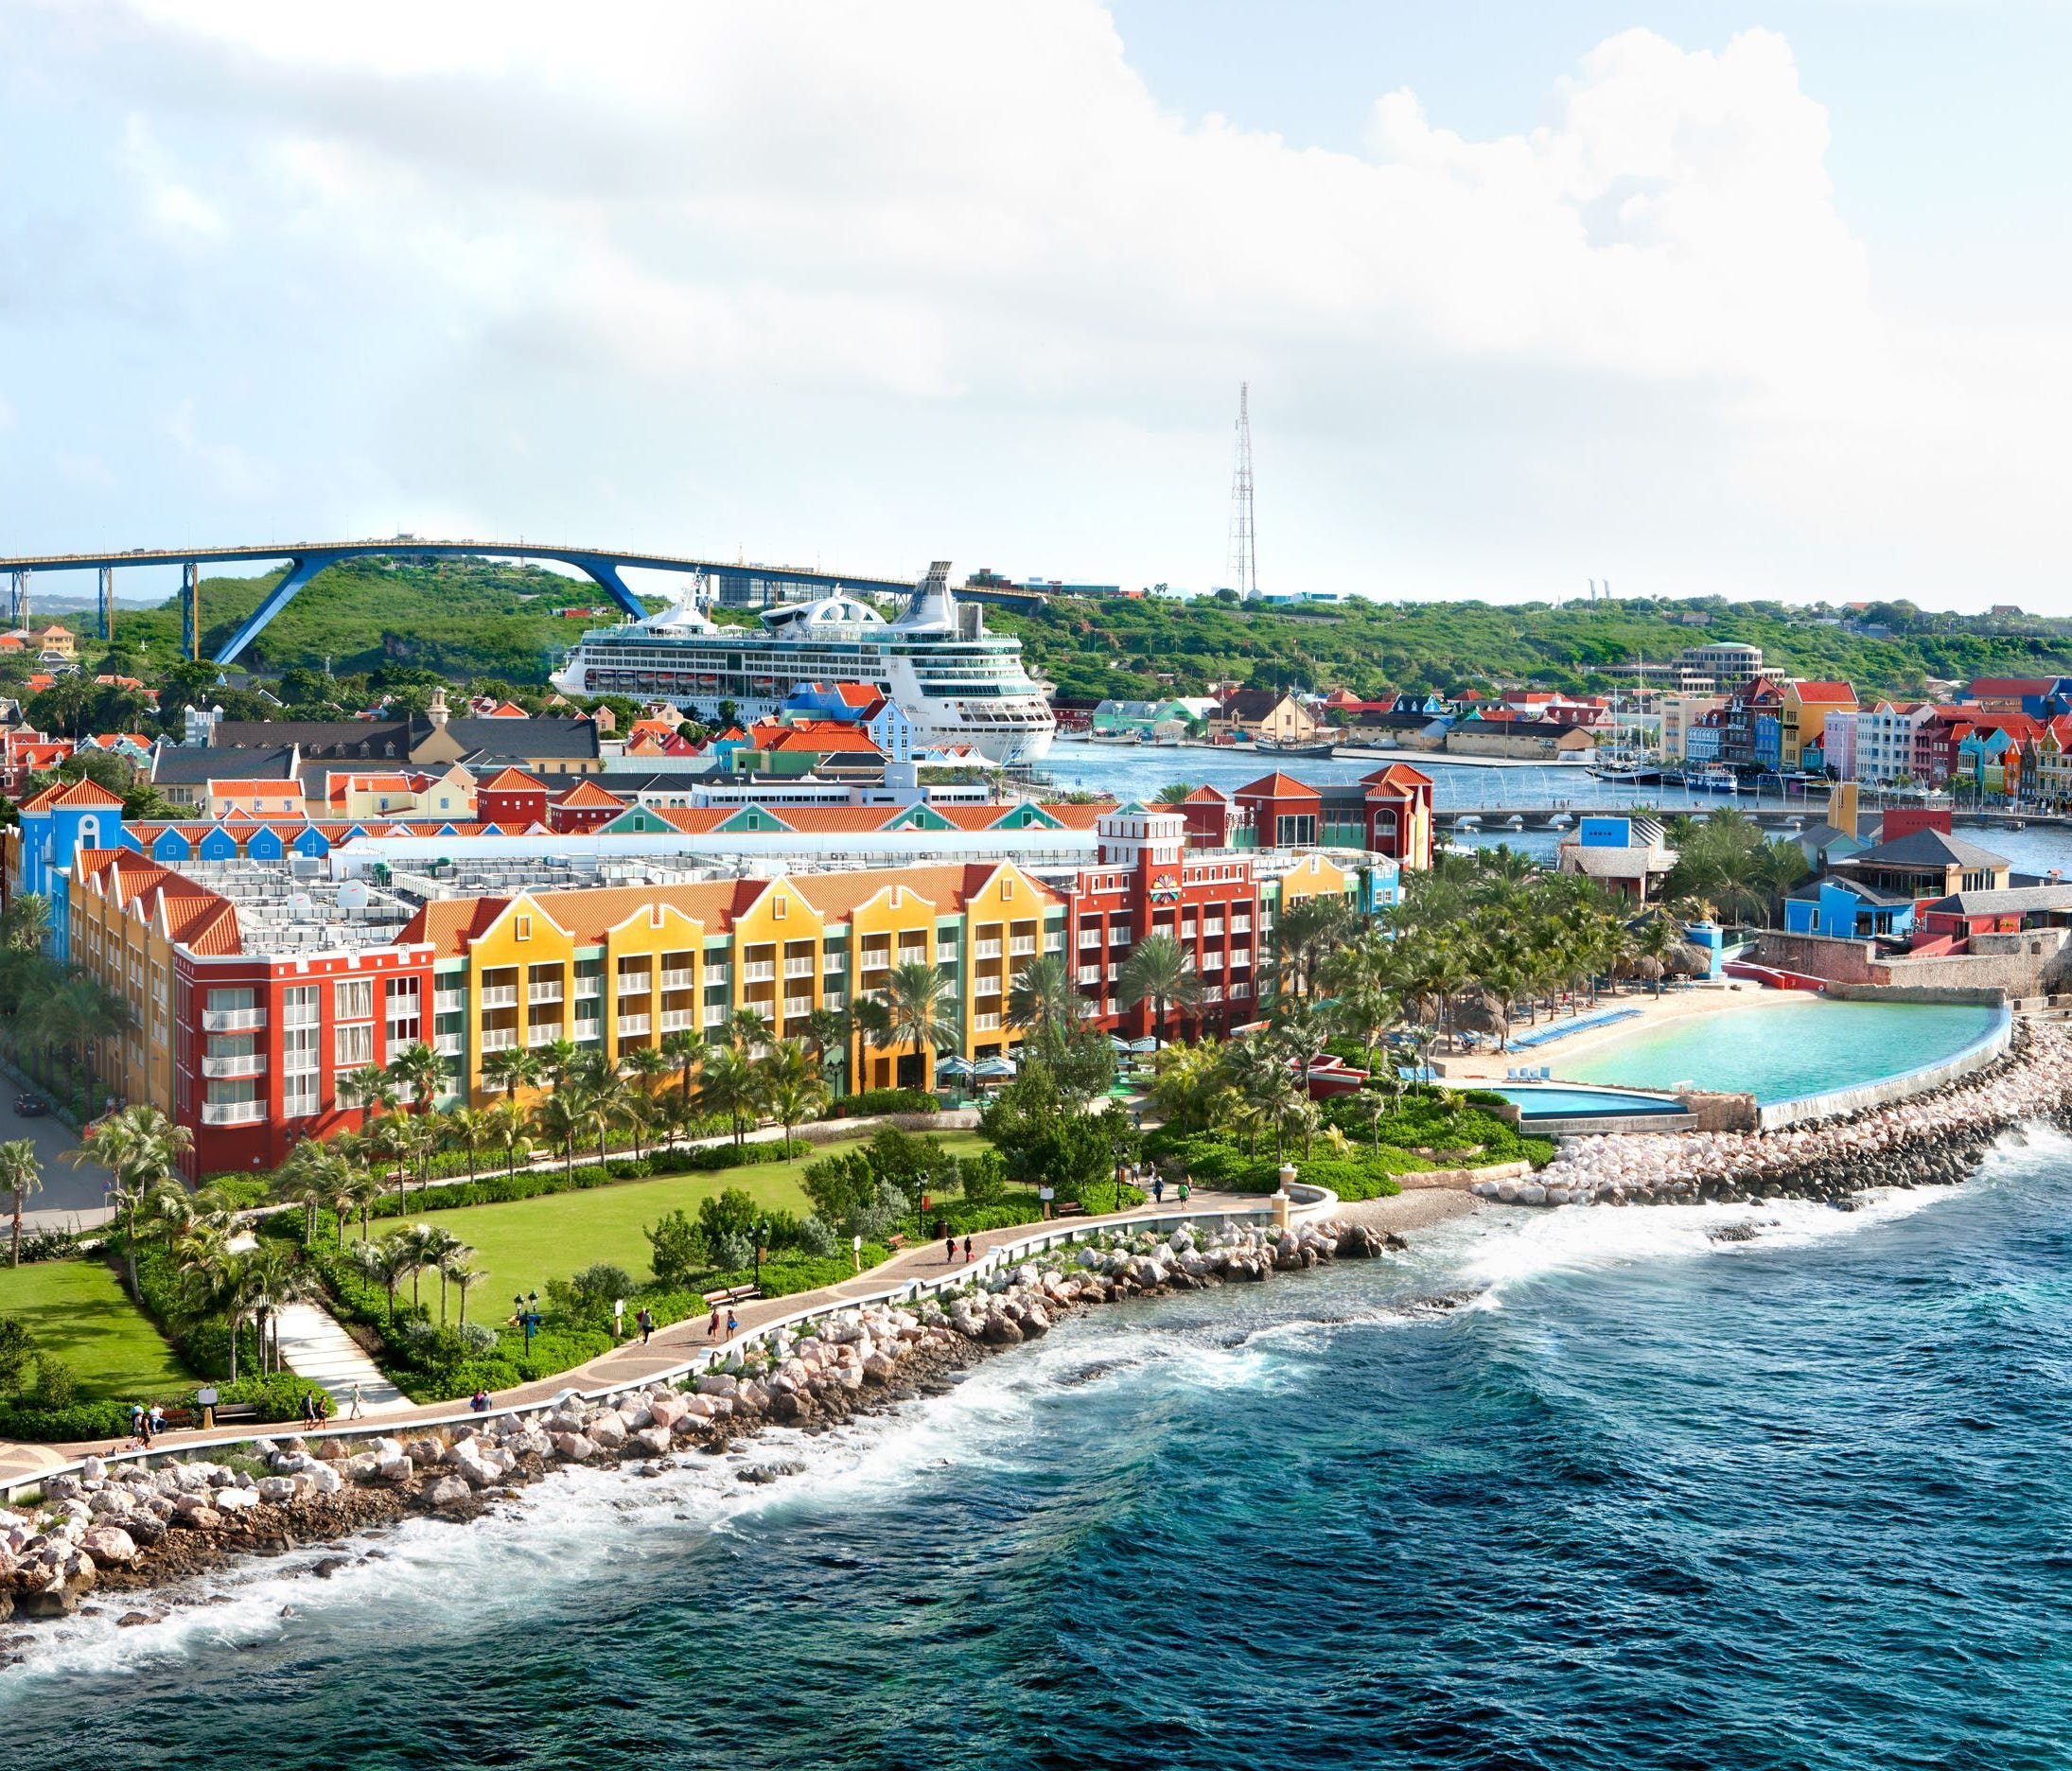 Renaissance Curacao Resort & Casino is dropping spring and summer rates for an ocean-view room to $207, from the nightly rate of $286 during the winter months, $244 during the Christmas week and $324 for New Year's.